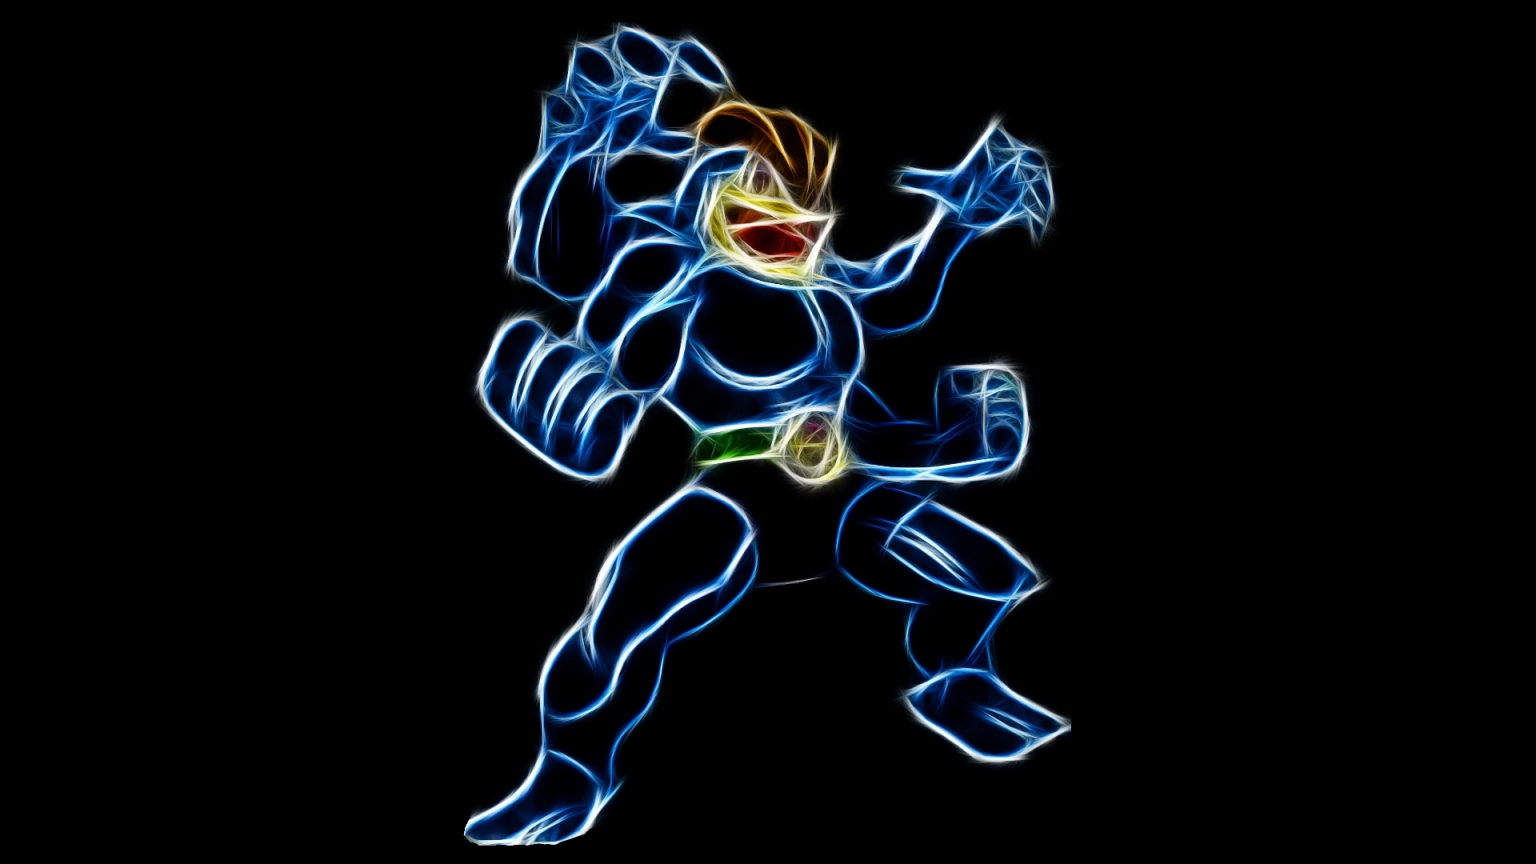 Machamp Wallpaper Full HD Pictures For